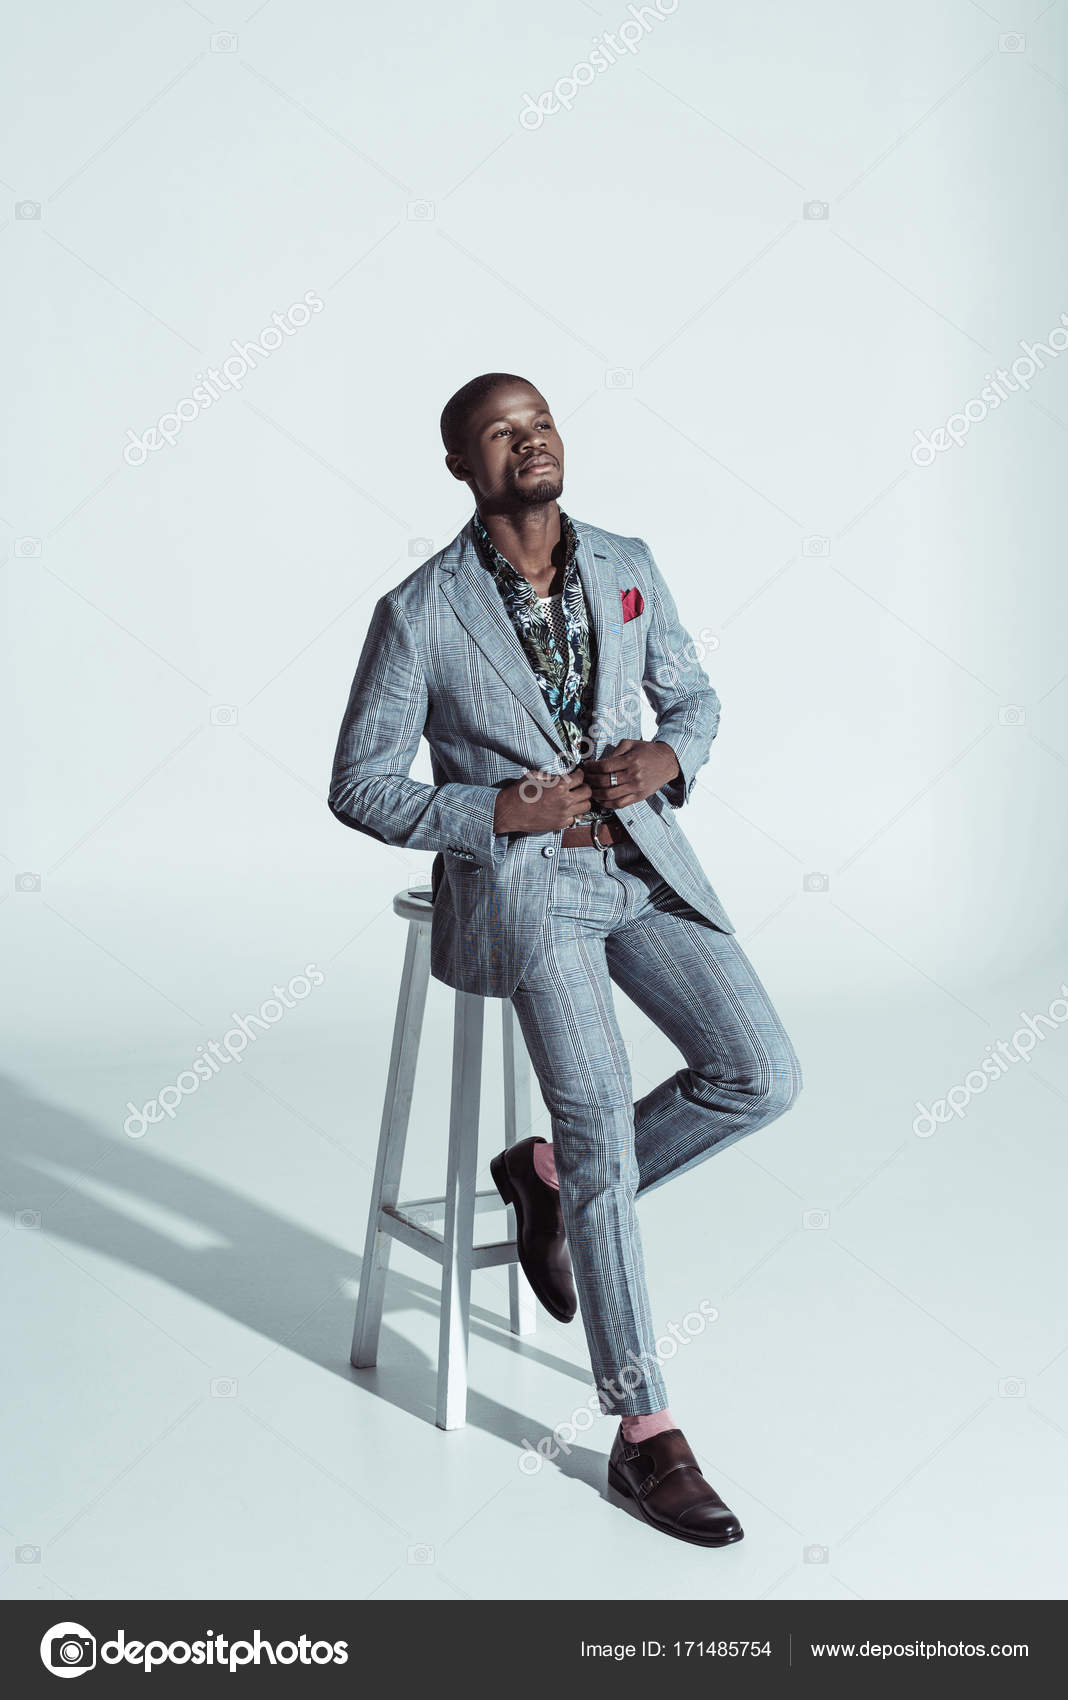 Elegant Young Handsome Man Posing Fashionable Stock Photo 500781277 |  Shutterstock